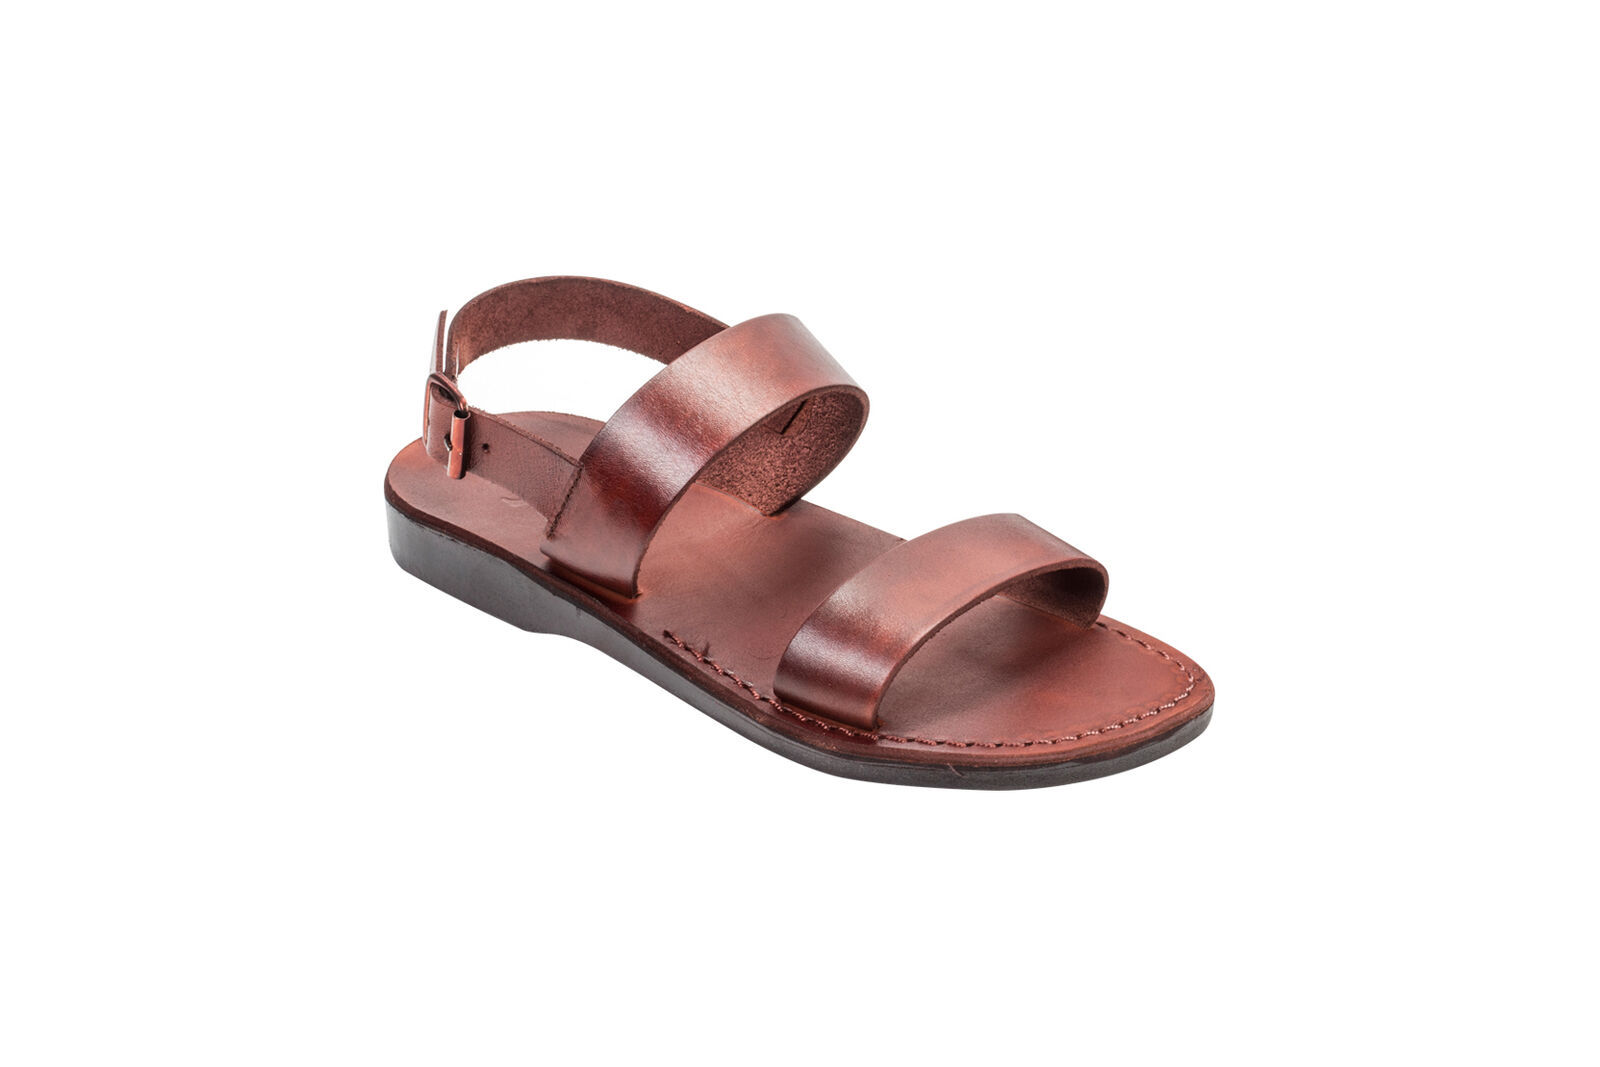 Men's Israel Handmade Sandals from Natural Genuine Leather Holyland 6 ...